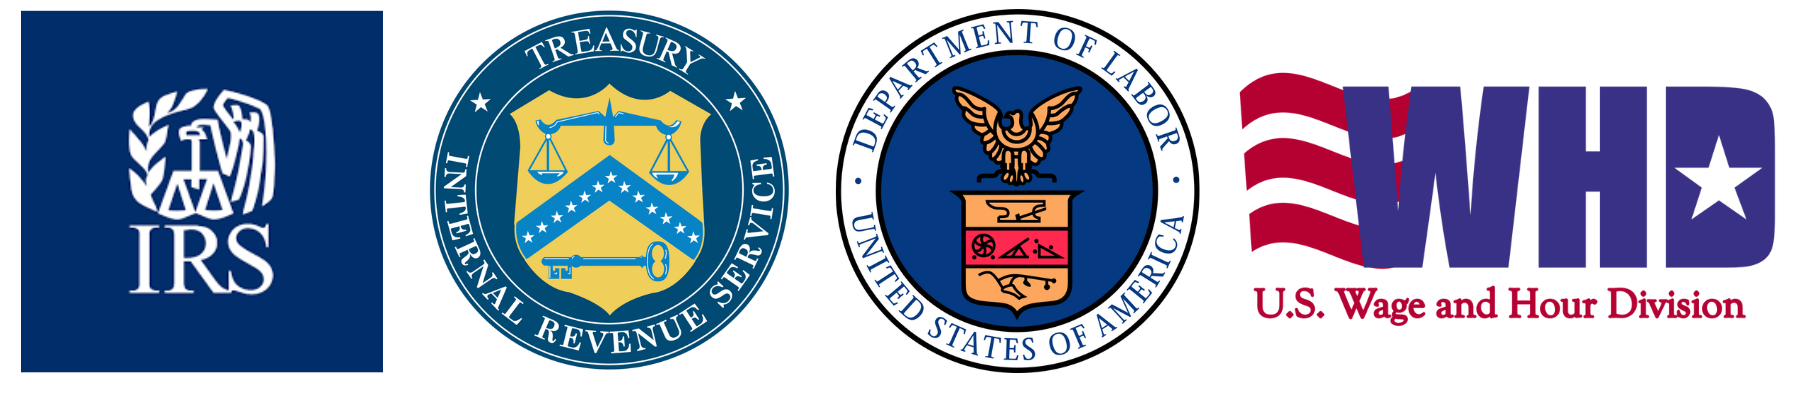 Logos for the Internal Revenue Service (IRS); the Department of the Treasury; the Department of Labor (DOL0; and the Wage & Hour Division